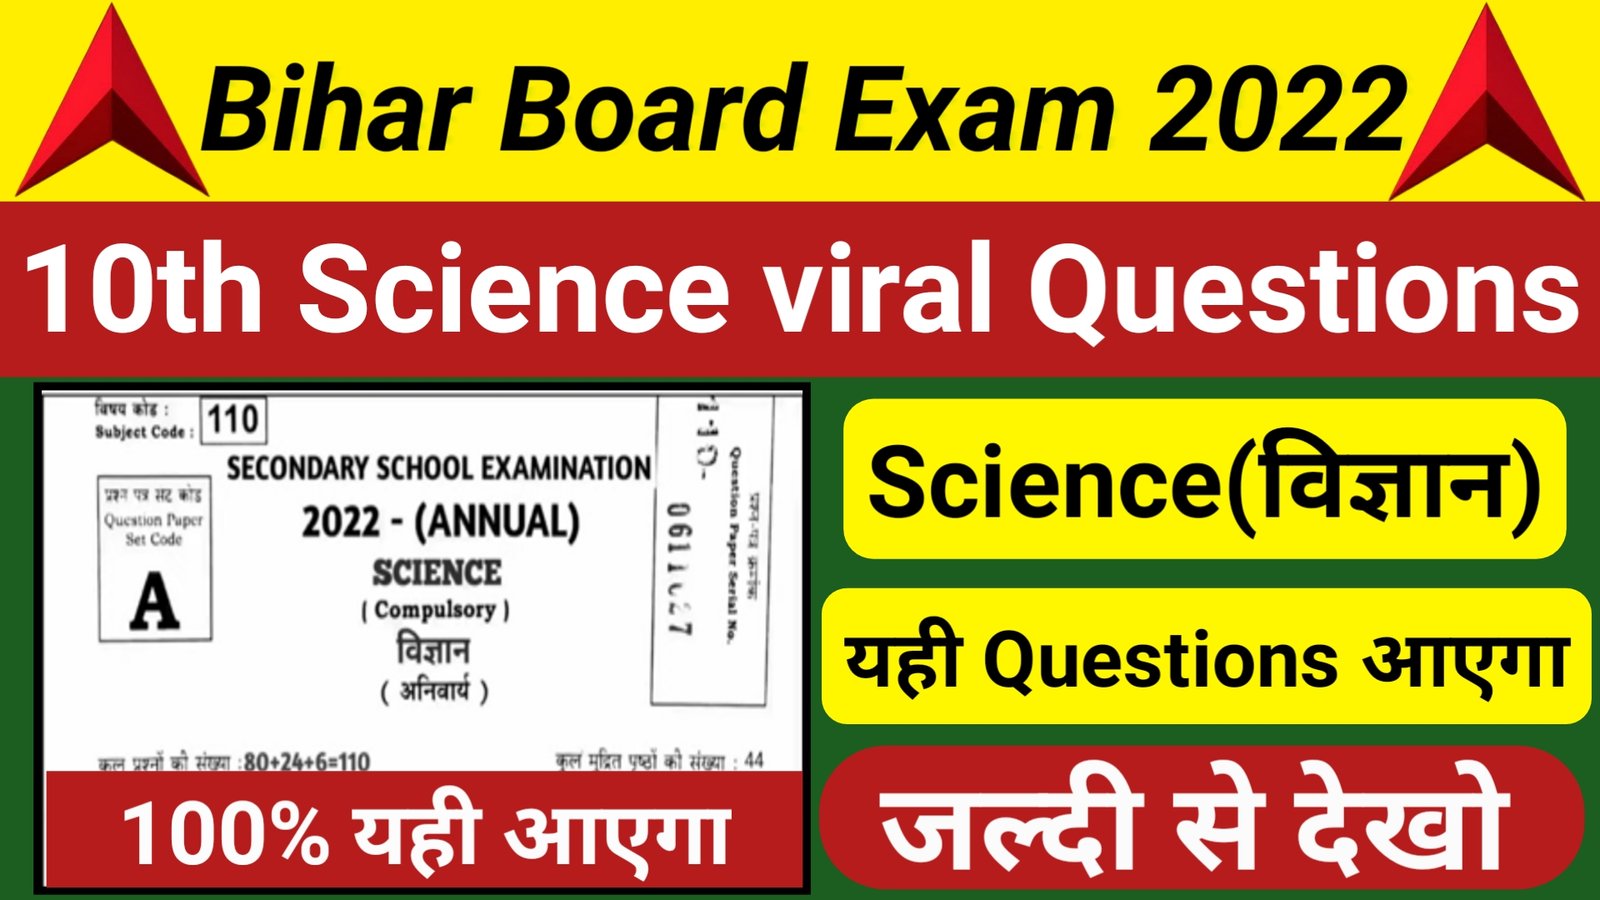 BSEB 10TH Science viral question exam 2022